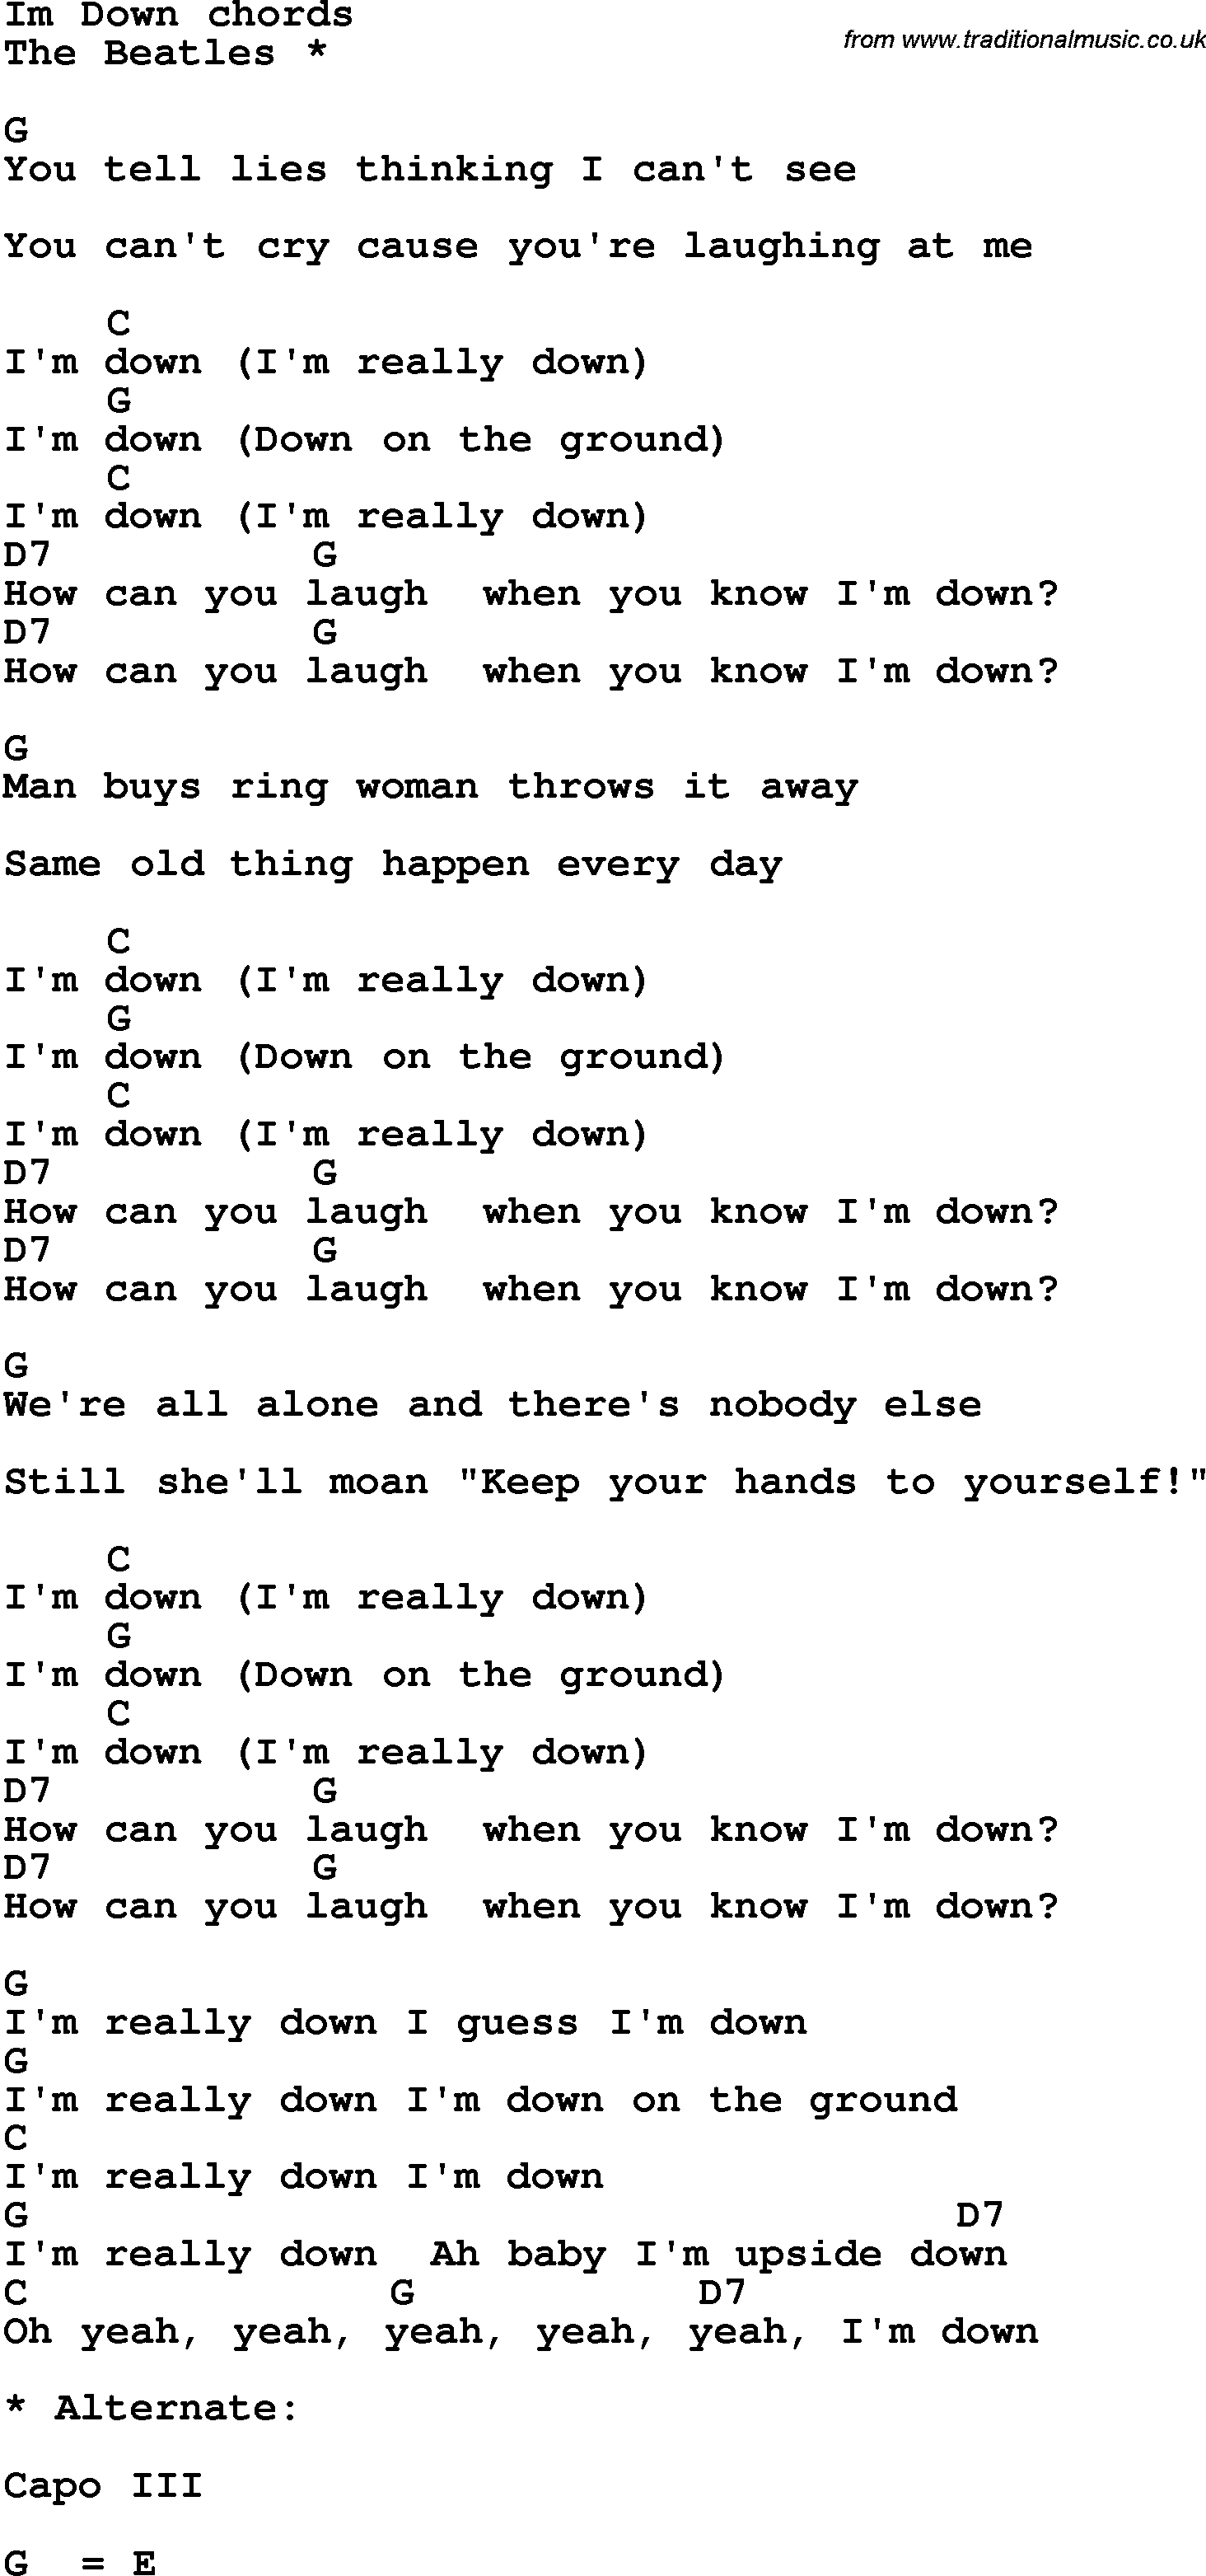 Song Lyrics with guitar chords for I'm Down - The Beatles